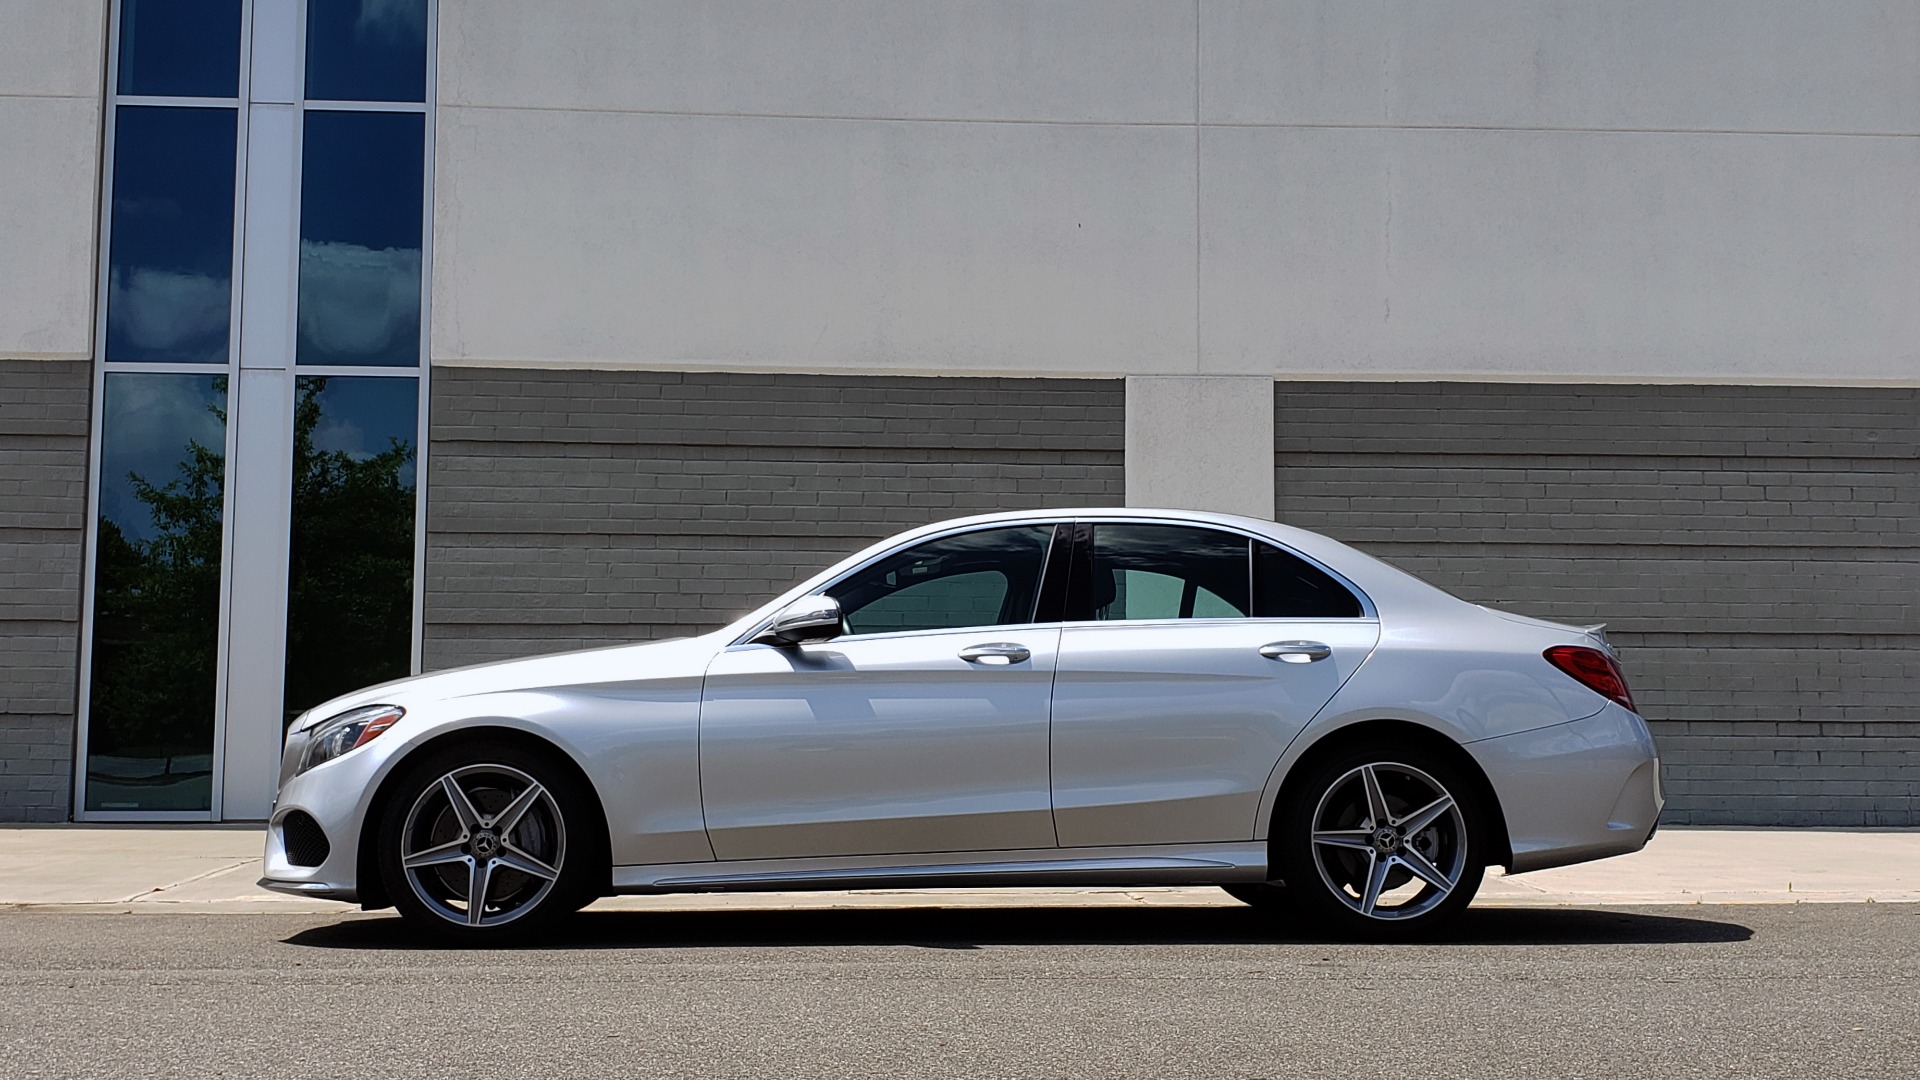 Used 2018 Mercedes-Benz C-CLASS C 300 4MATIC / PREMIUM PKG / PANO-ROOF / AMG LINE / BURMESTER / REARVIEW for sale Sold at Formula Imports in Charlotte NC 28227 5